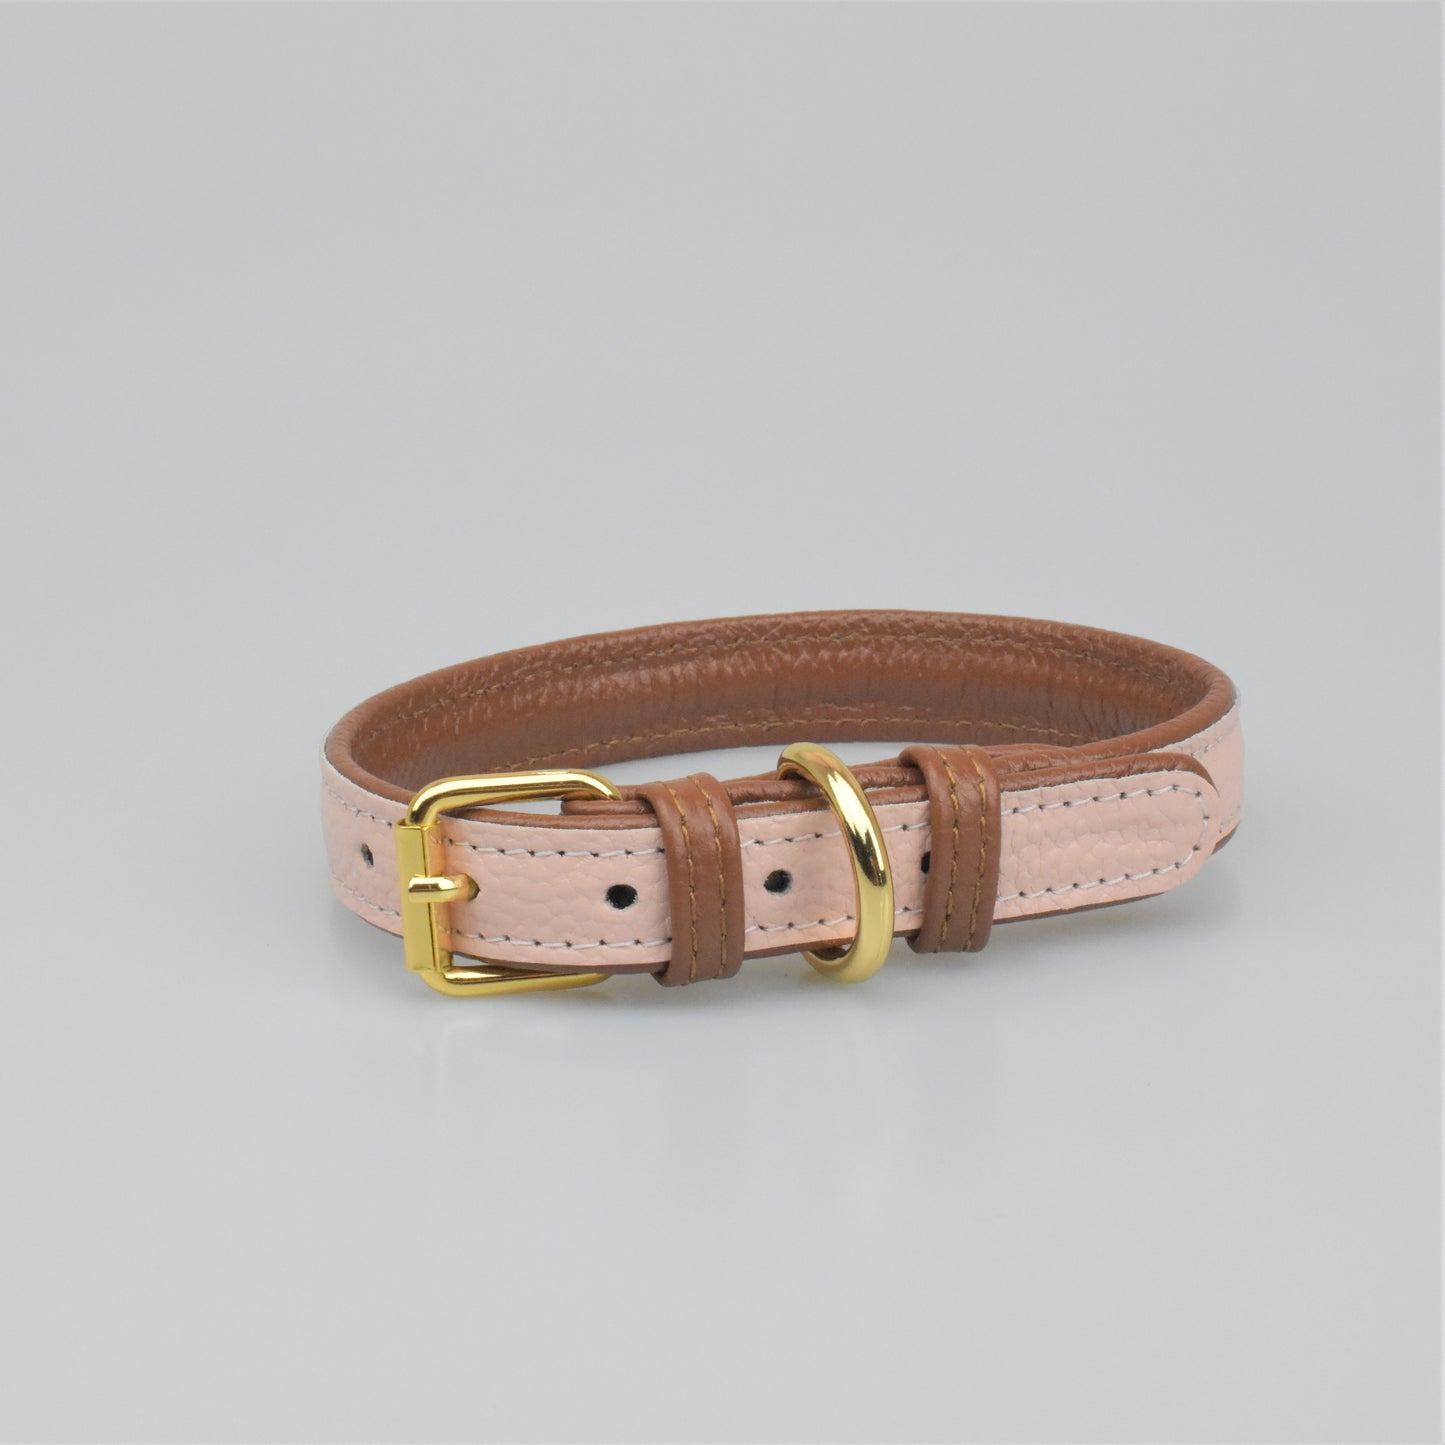 Willow Walks leather collar in brown and soft pink